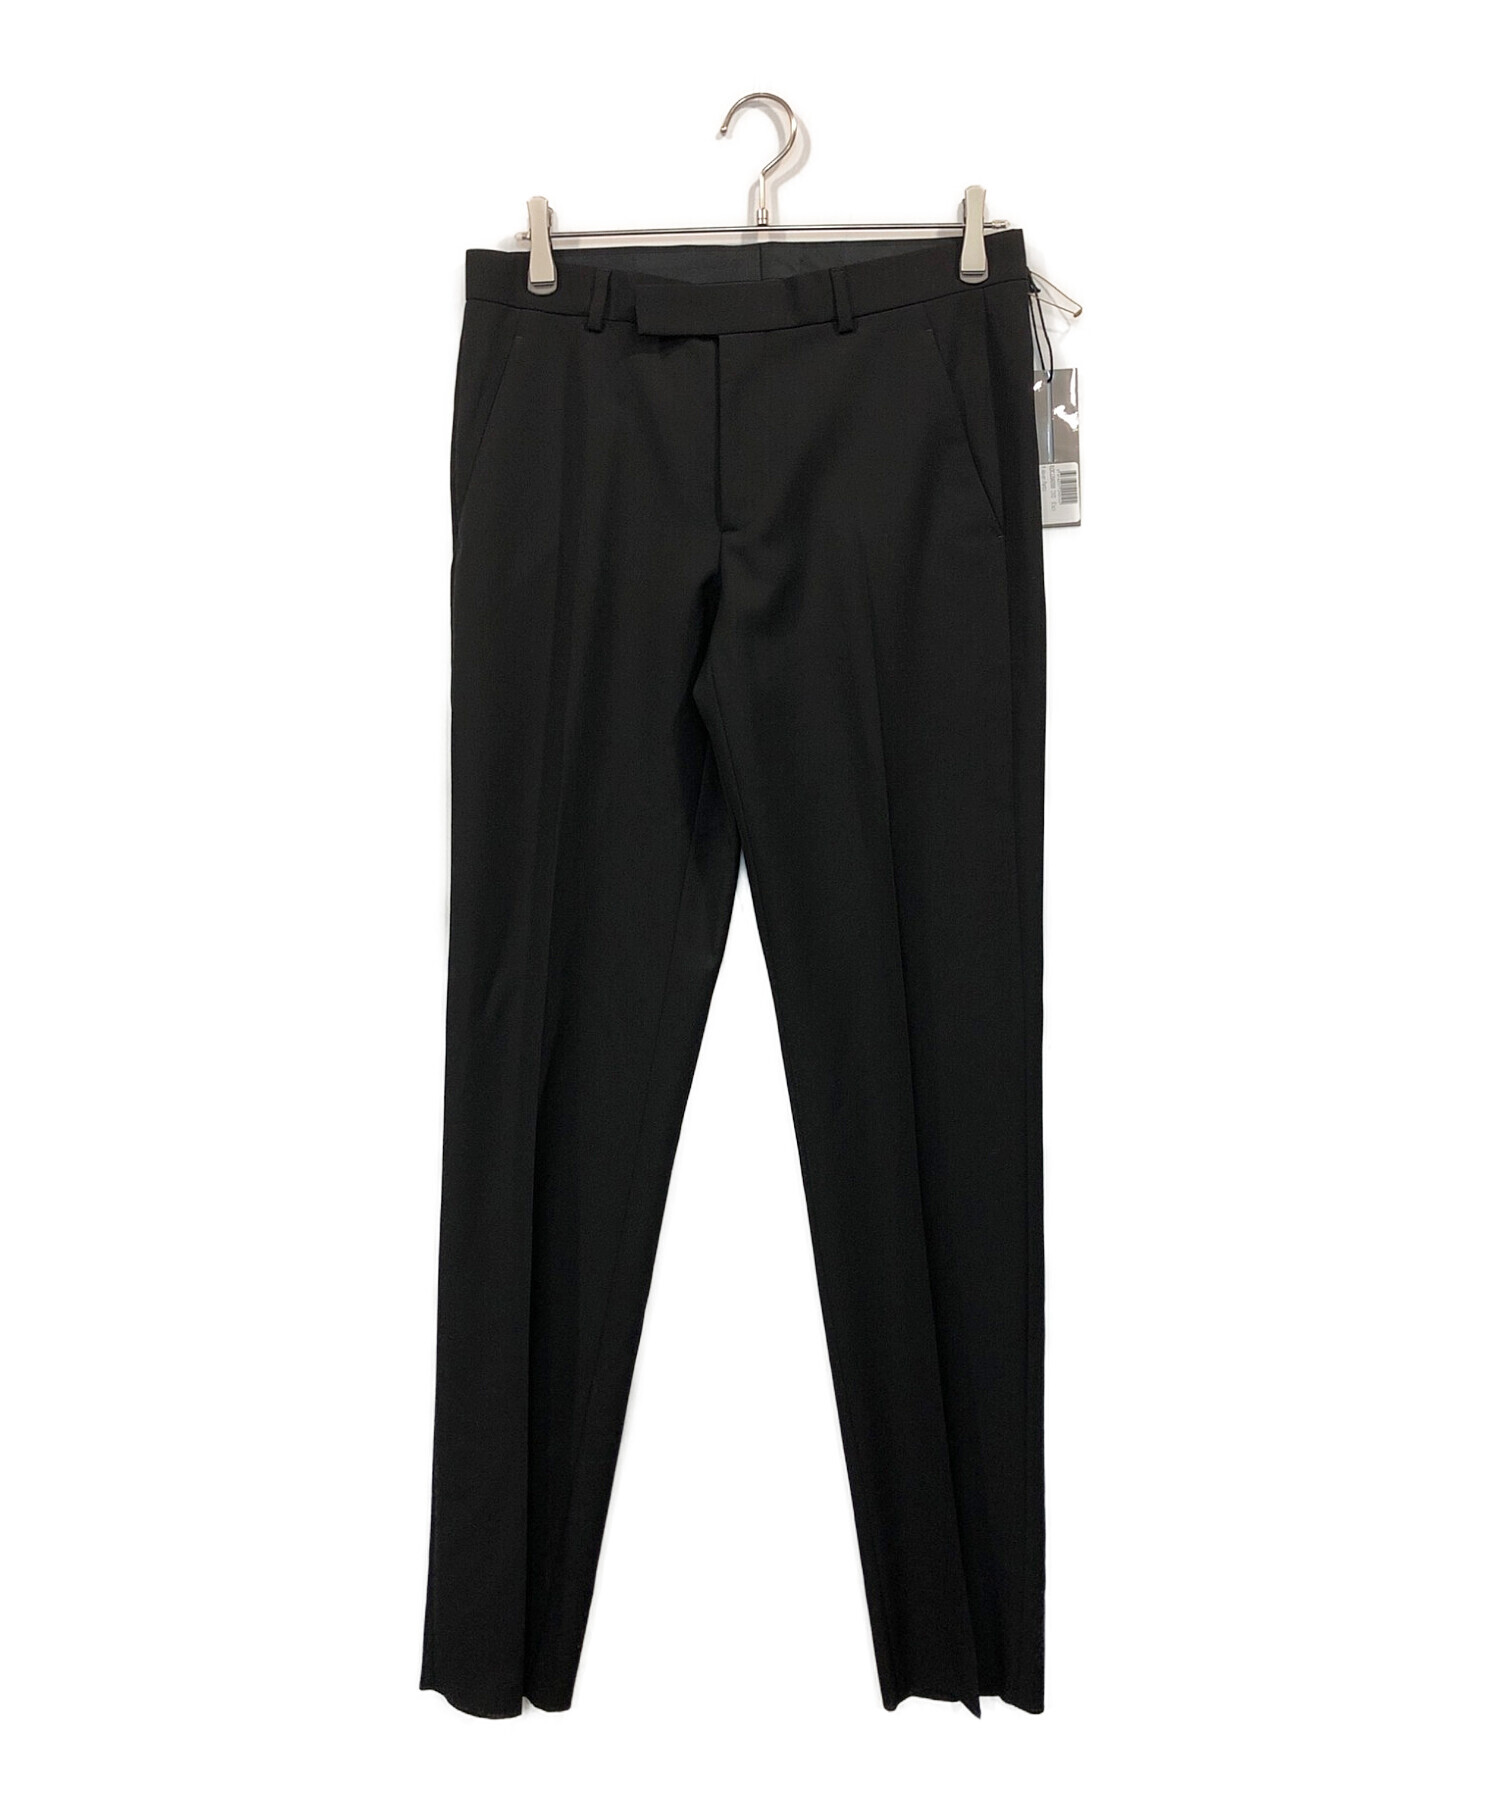 Pants with Dior Oblique Belt Black Wool Twill